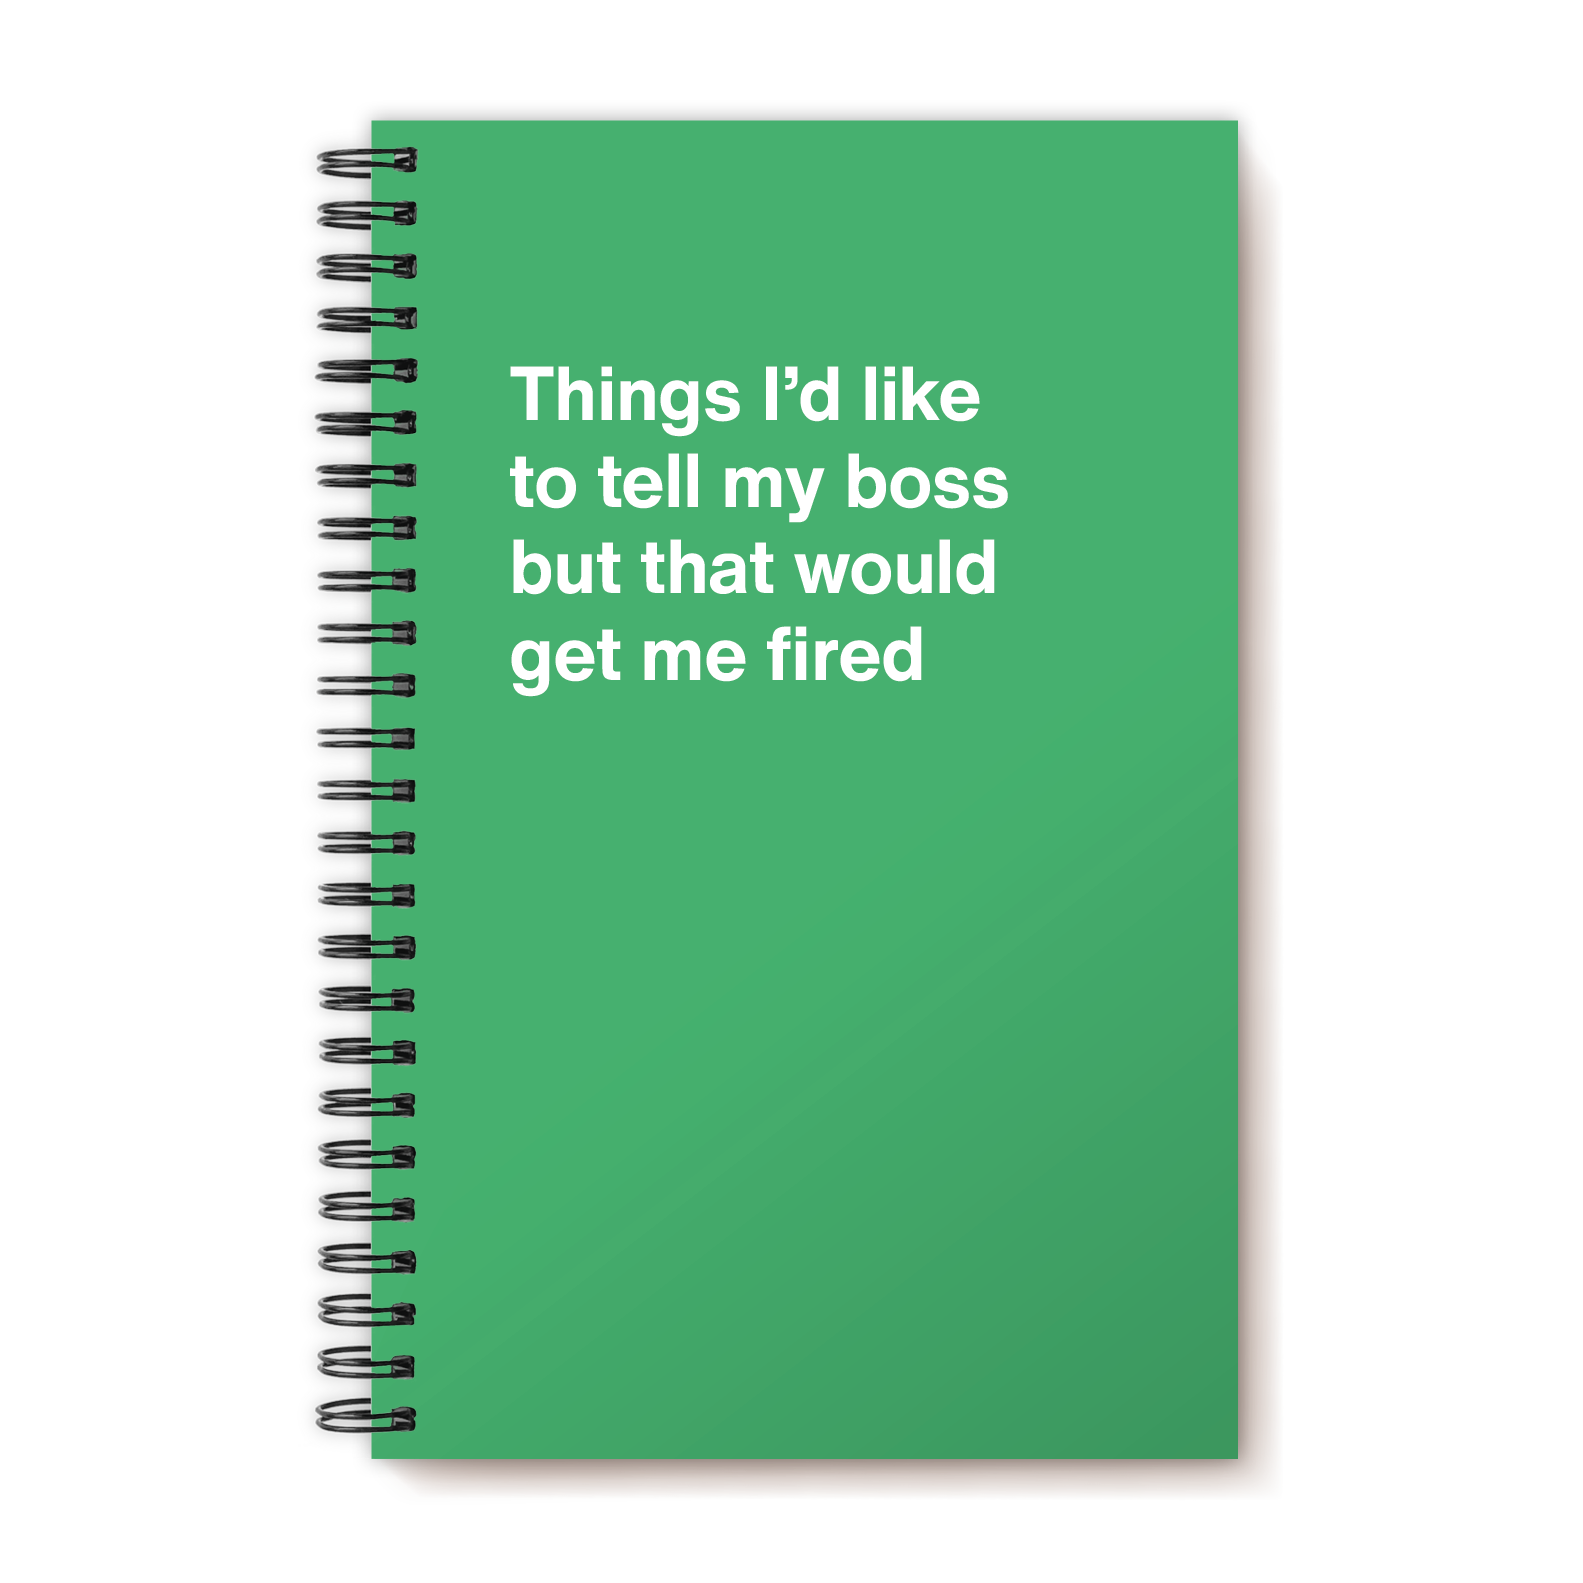 If You Have Any Questions, Feel Free To Email Me.: Lined Office Notebook  Funny For Coworker, Boss, A Friend, Fun Gag